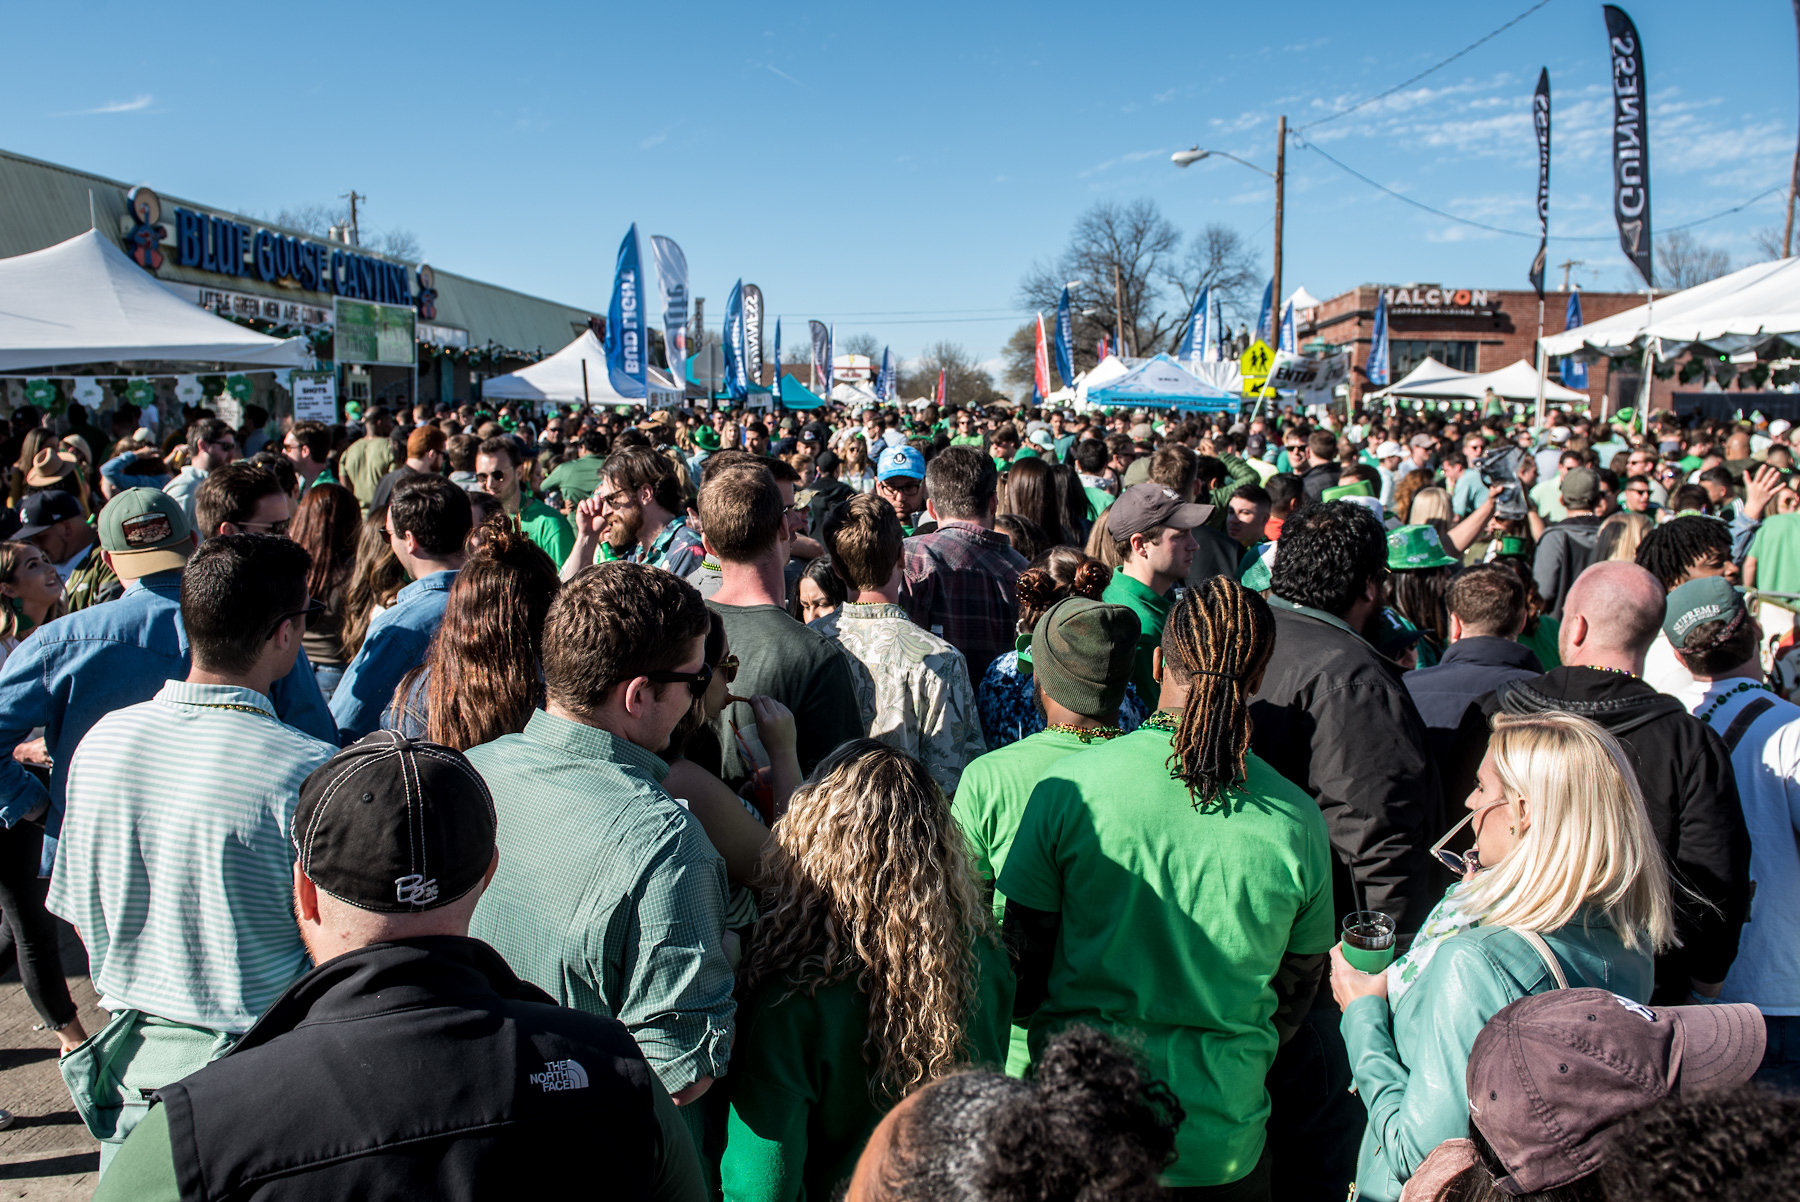 Gallery Relive Lower Greenville During the St. Patrick's Day Block